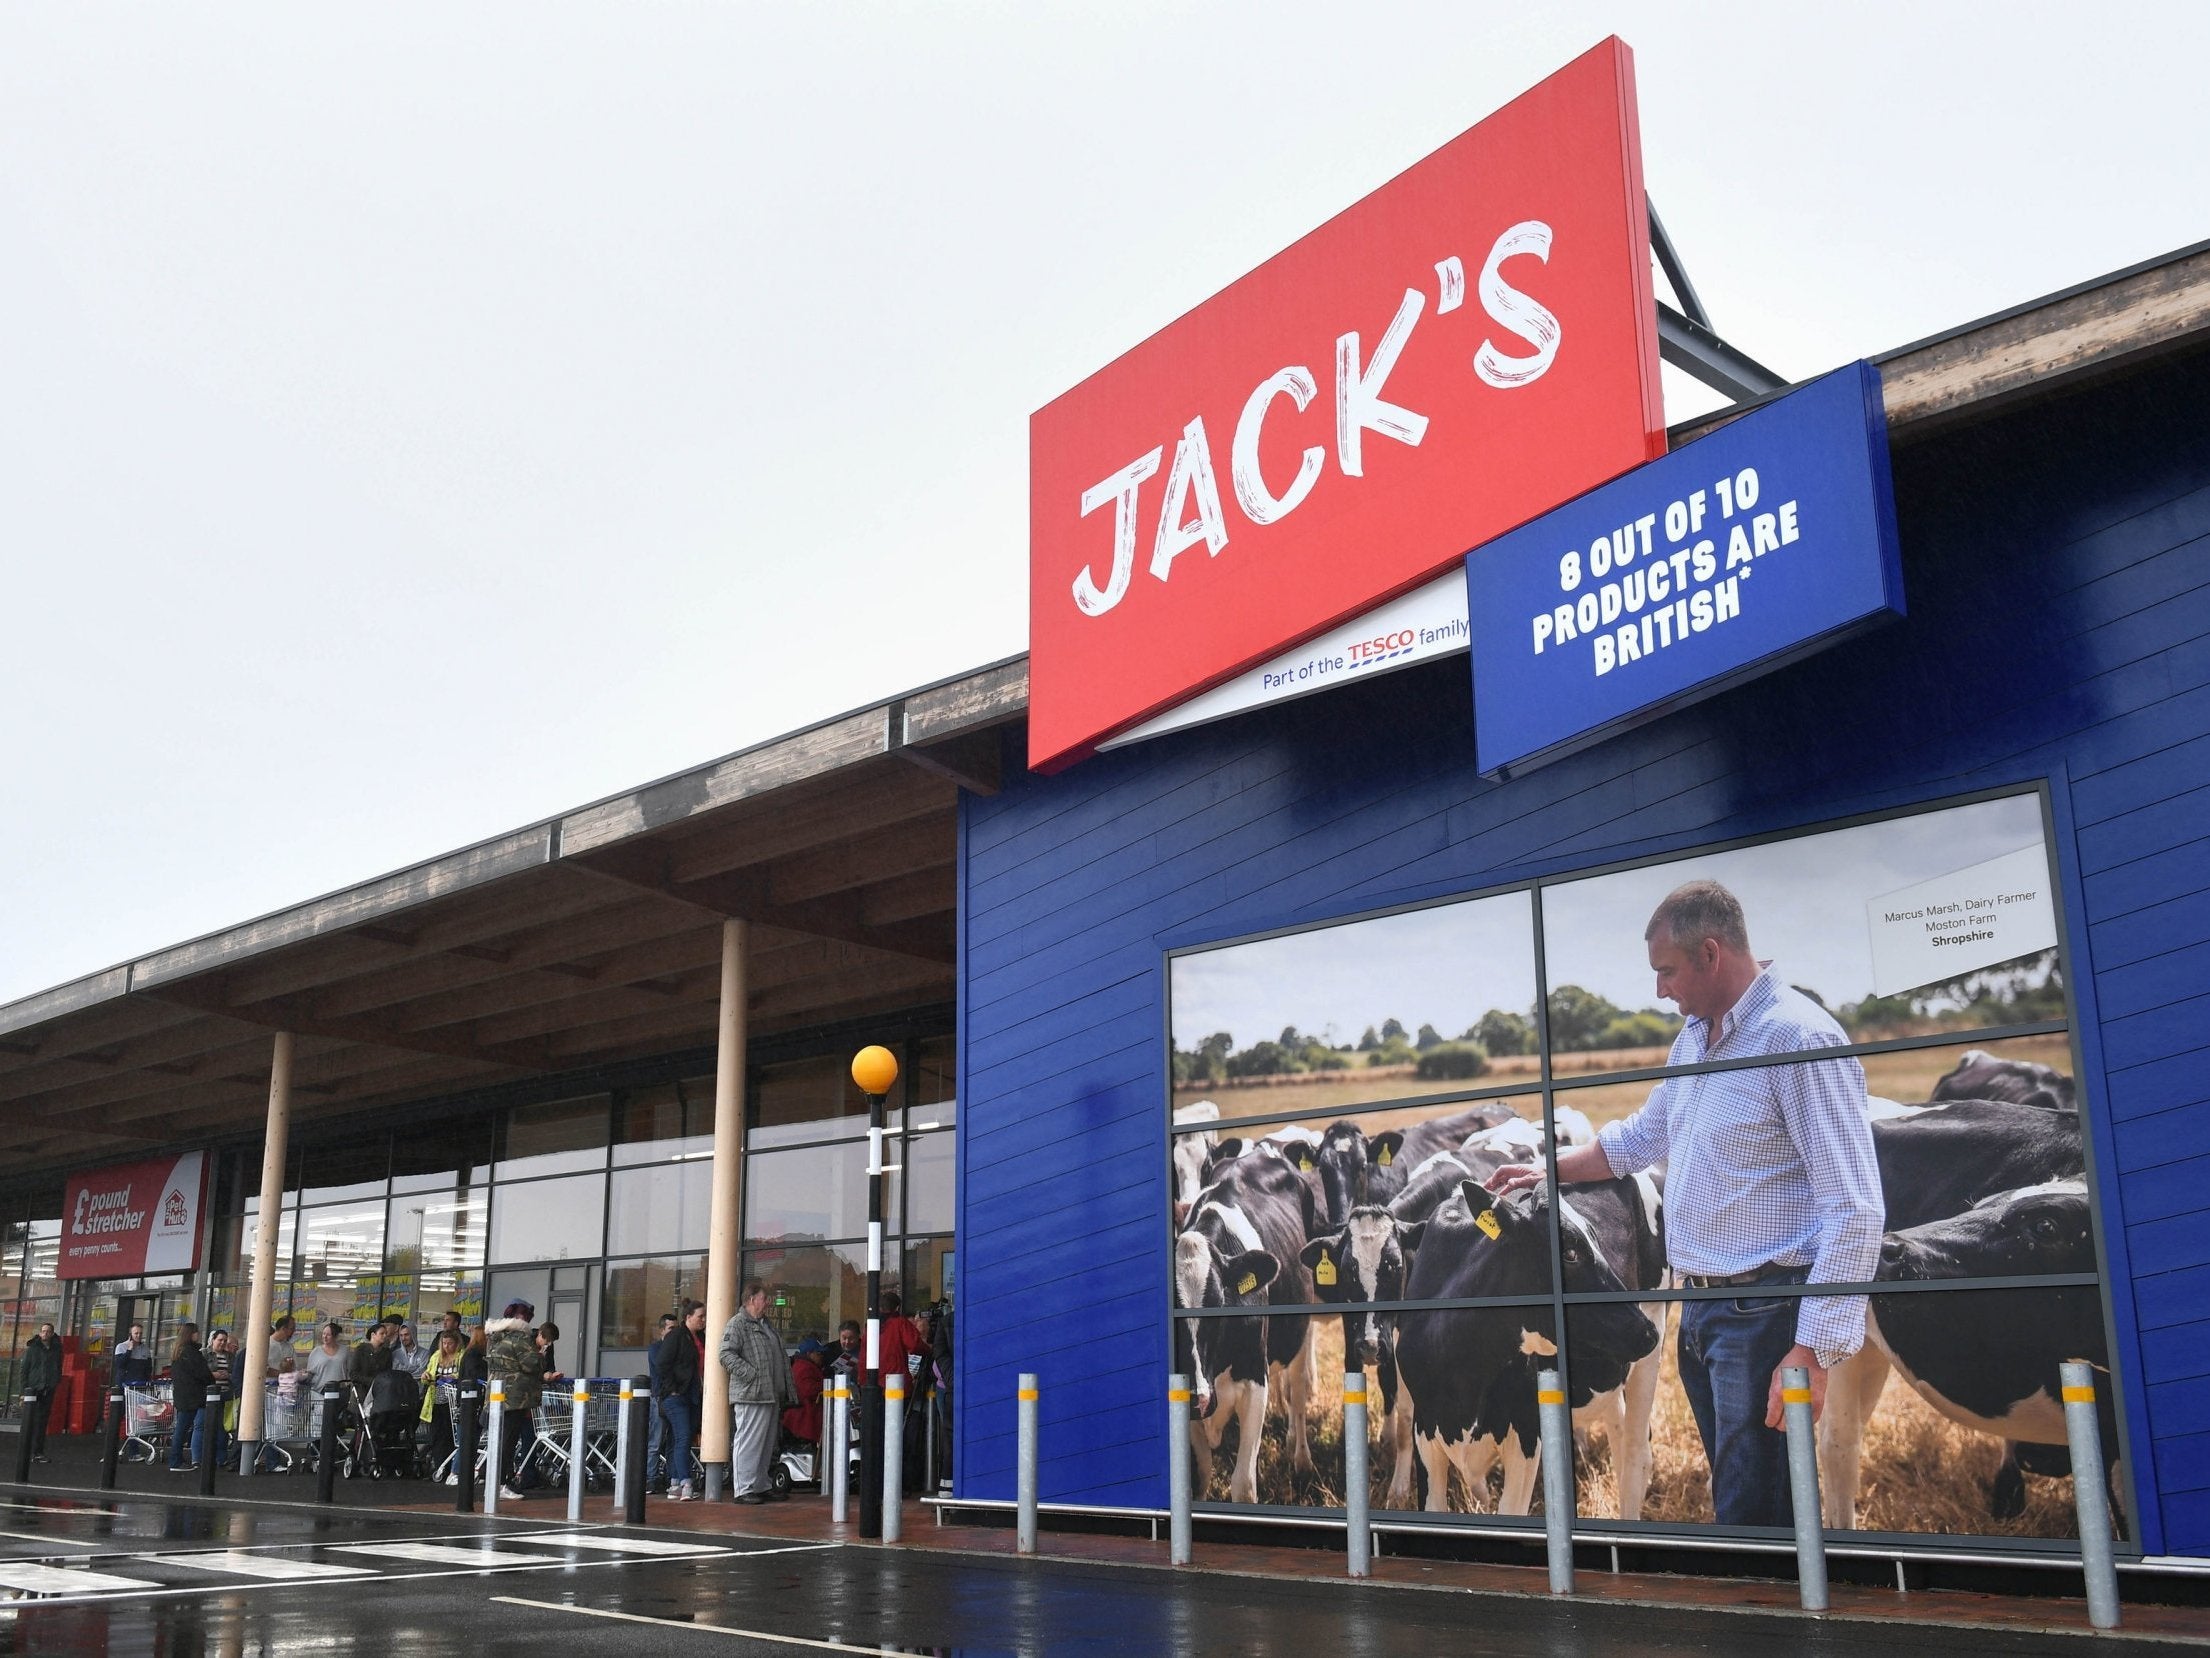 Tesco launched new discount chain Jack’s in September this year